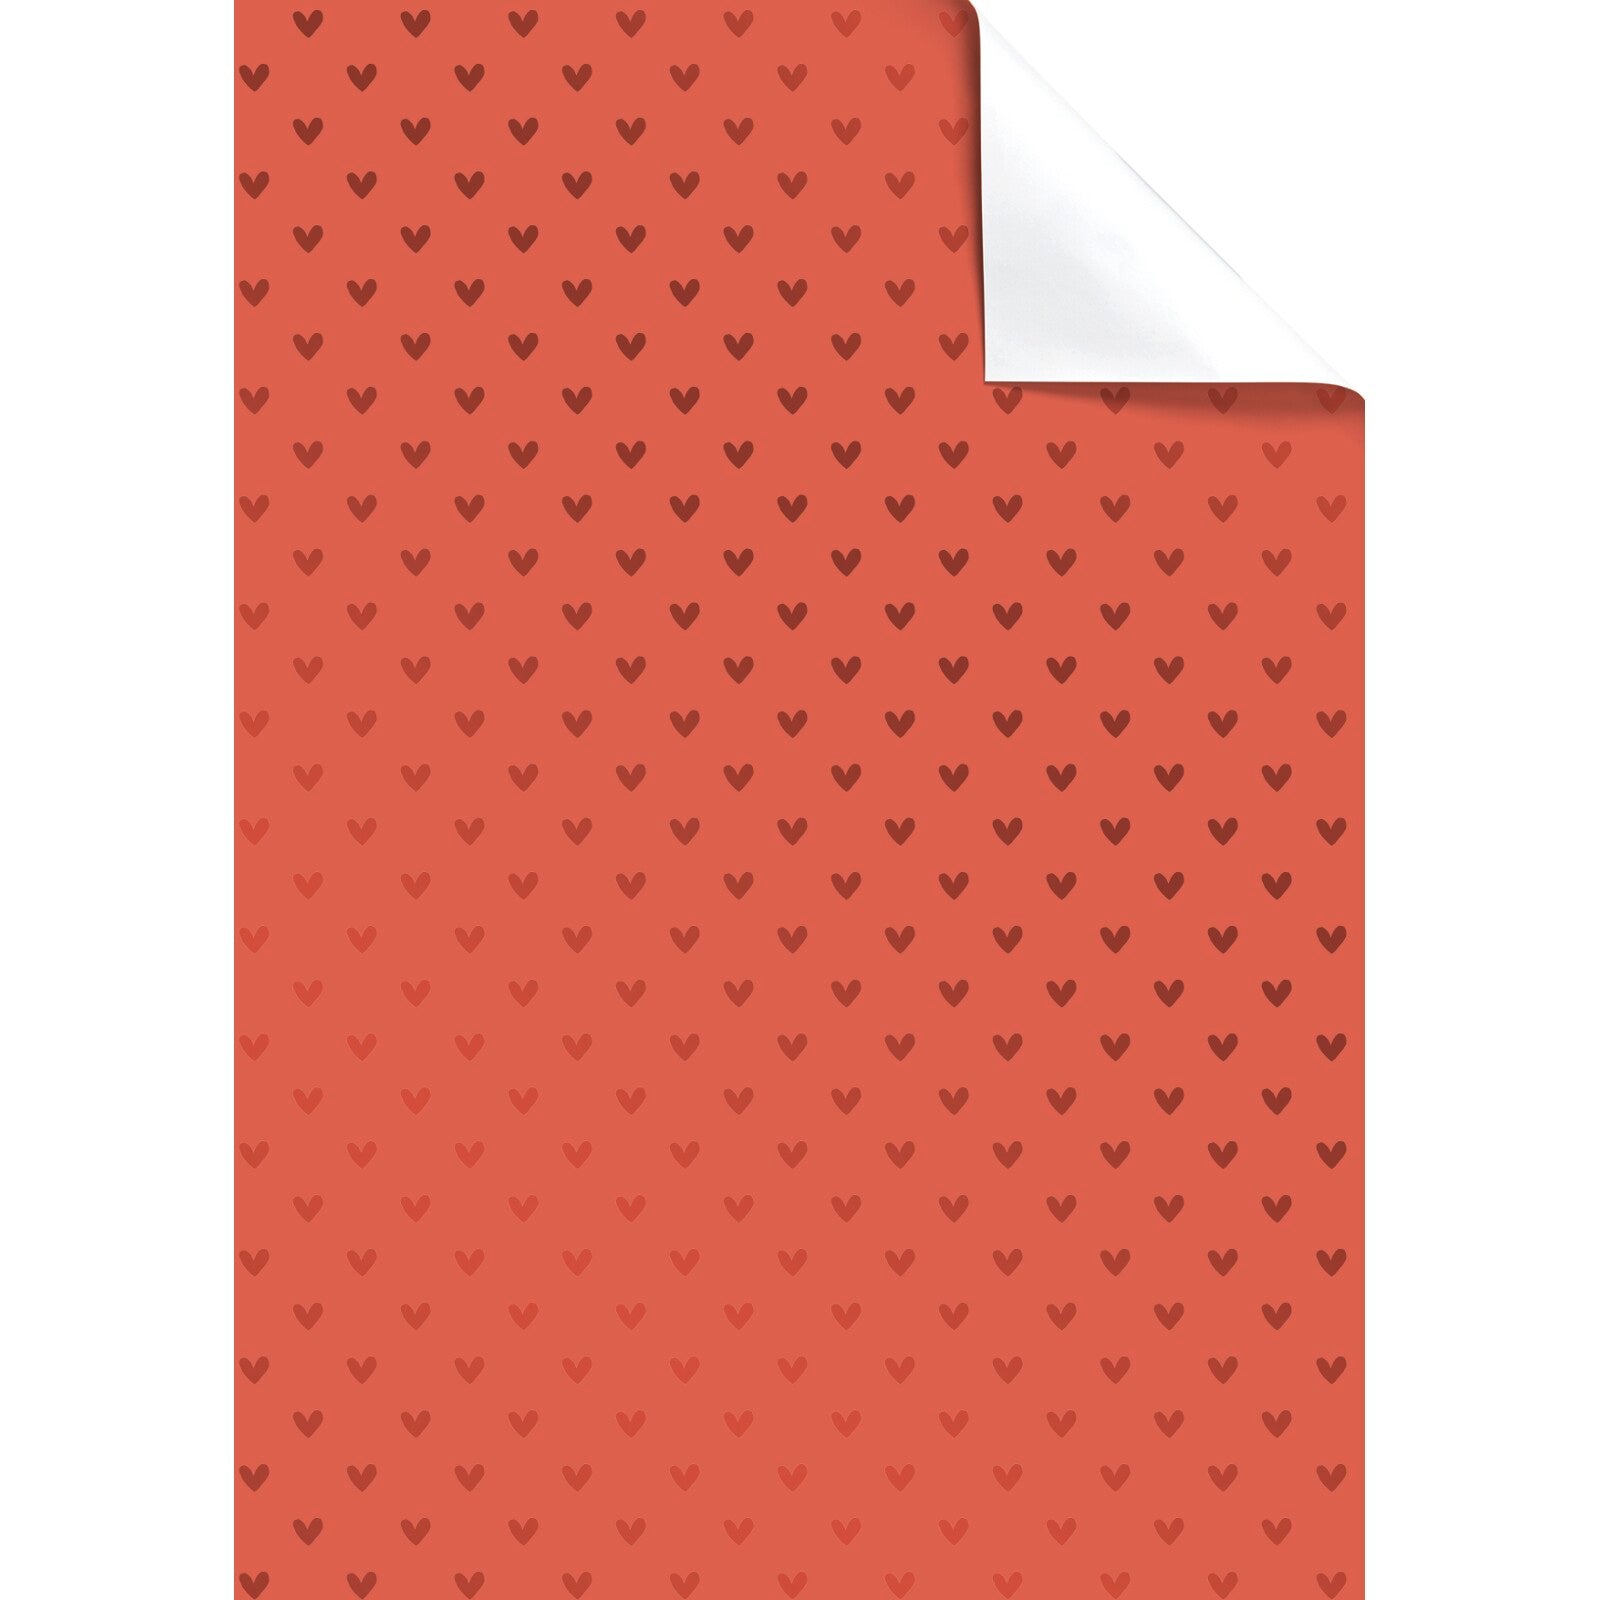 Zisa Red Heart Single Wrapping Paper Sheet by penny black